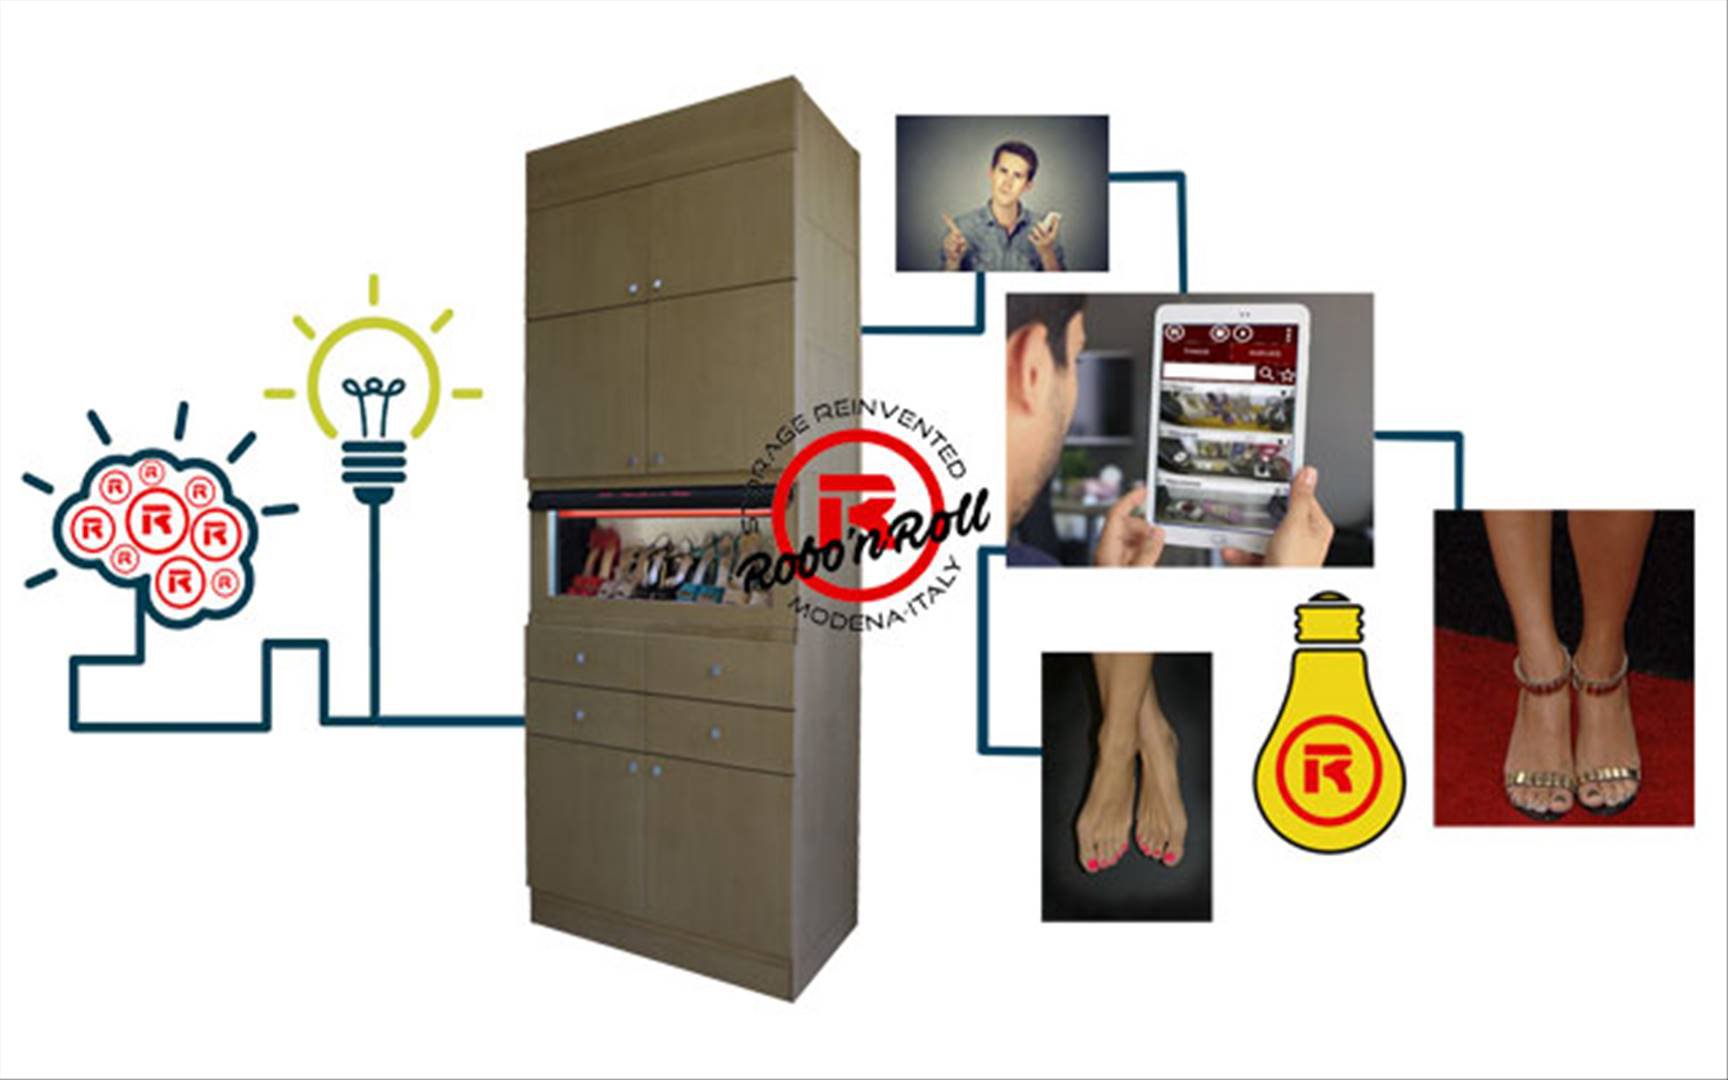 Robo is an authomated closet which ease your life.